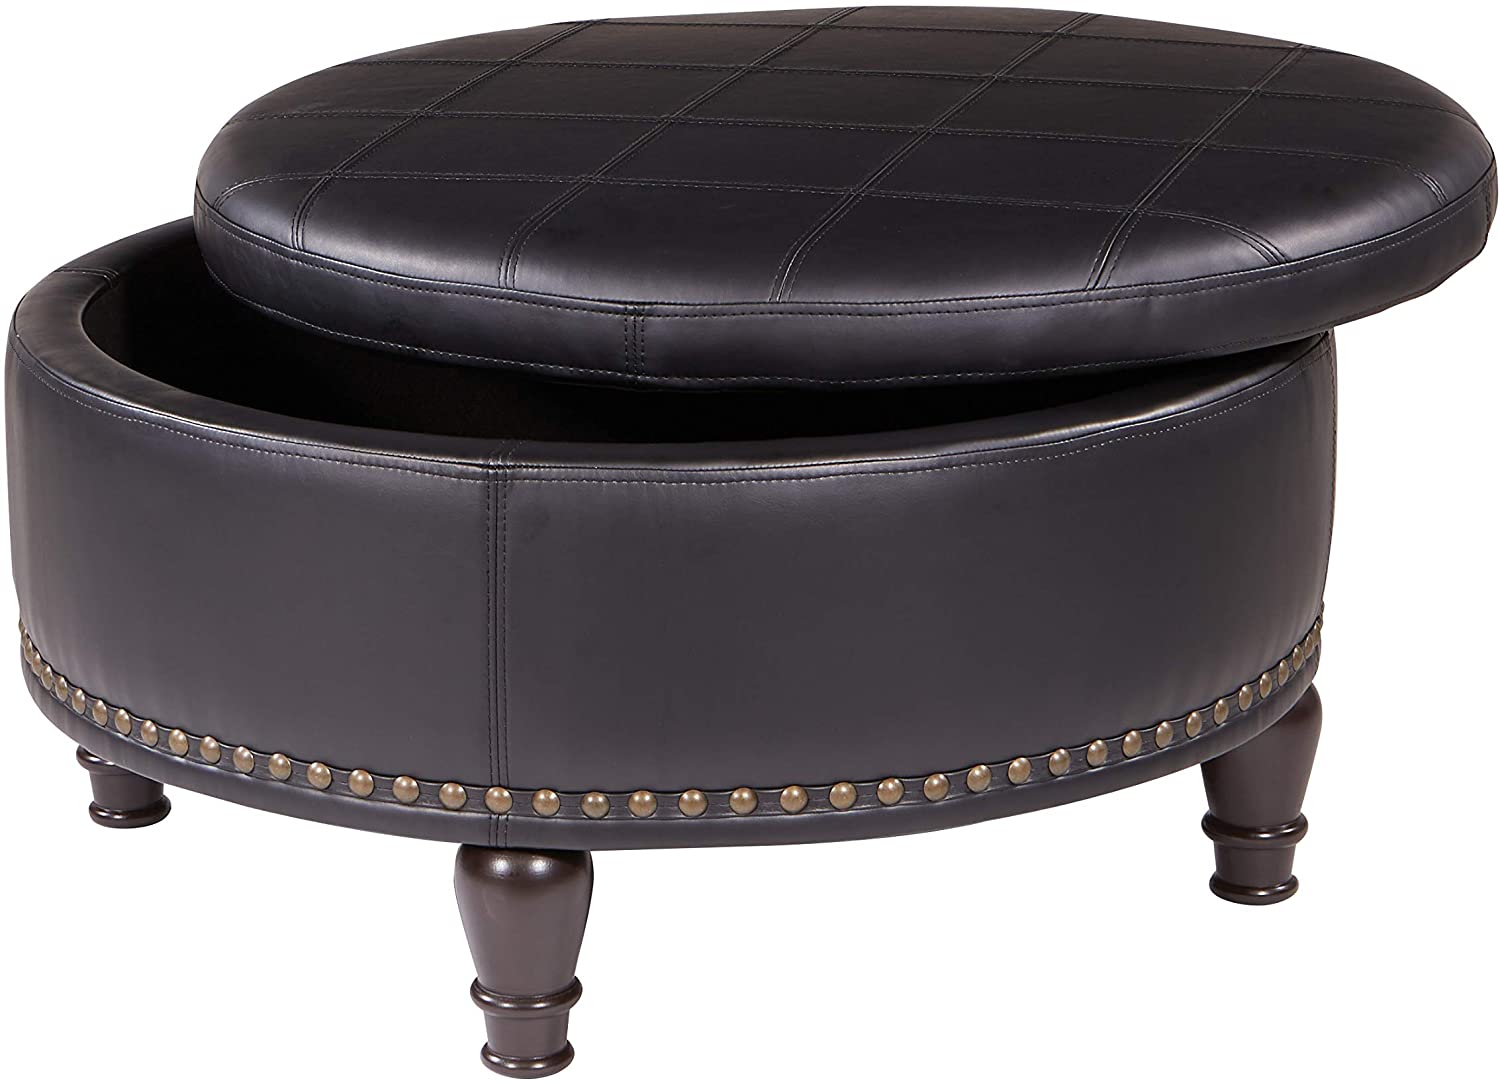 Photo 1 of OSP Home Furnishings Augusta Round Storage Ottoman with Decorative Nailheads and Flip Over Lid with Serving Tray Surface Black Faux Leather